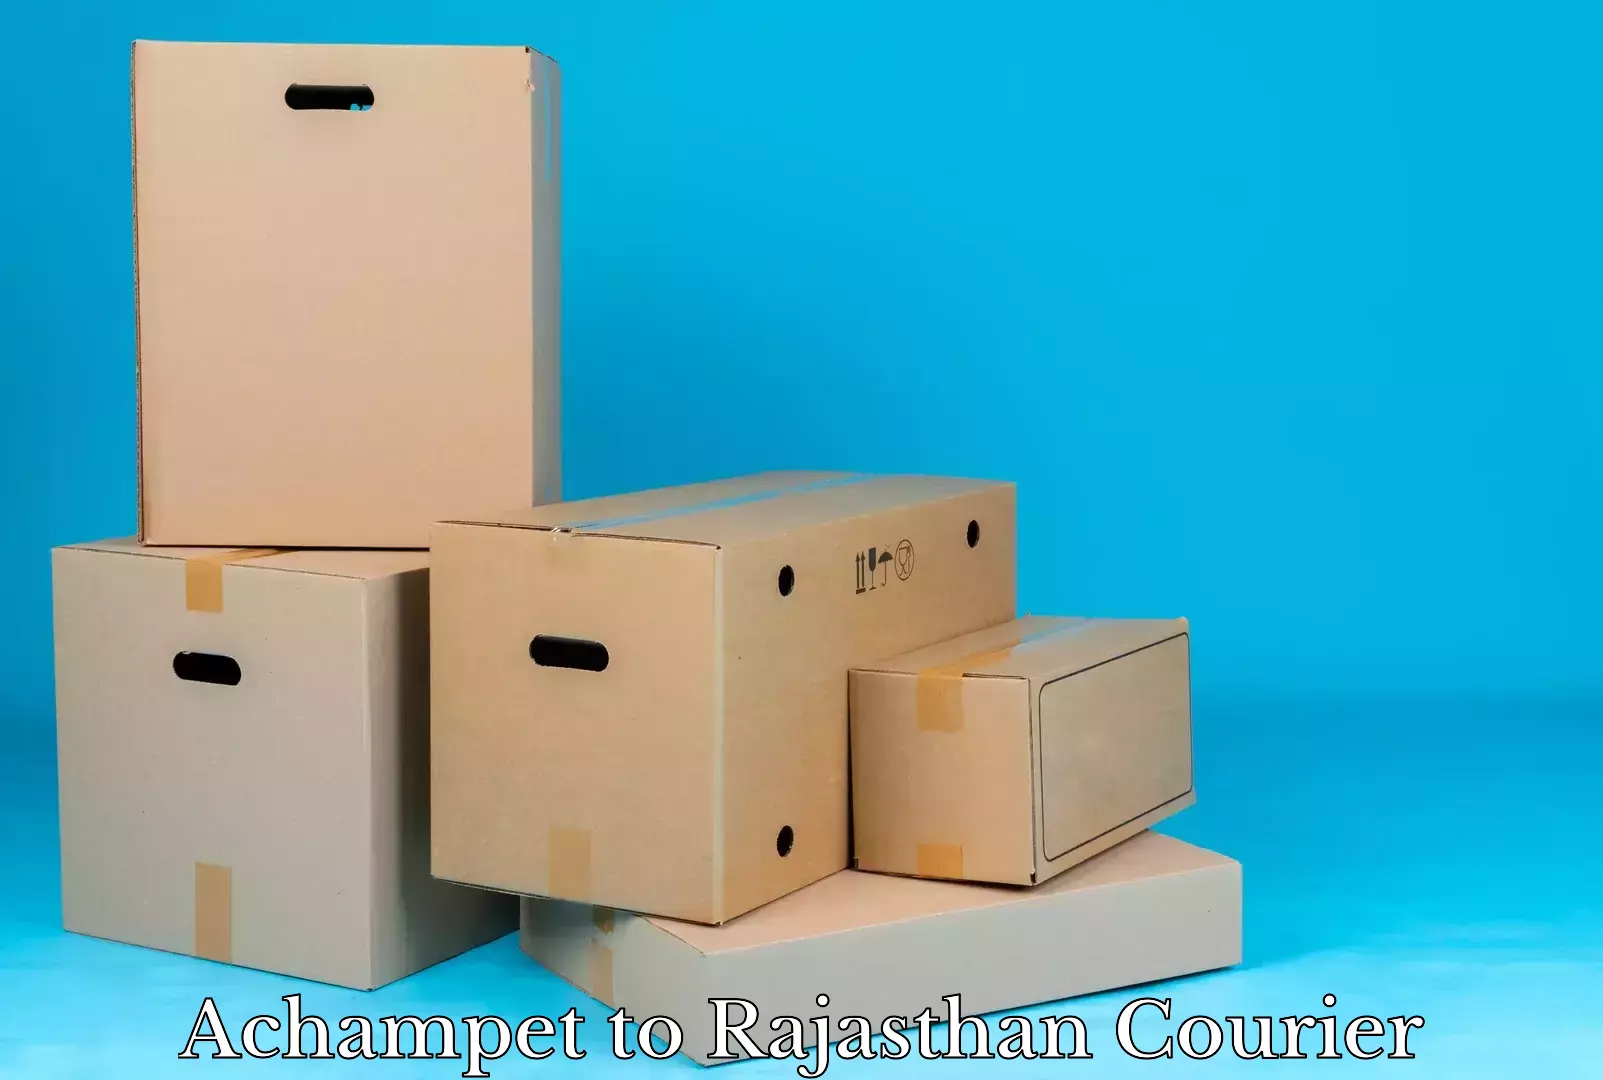 Professional moving company Achampet to Yeswanthapur